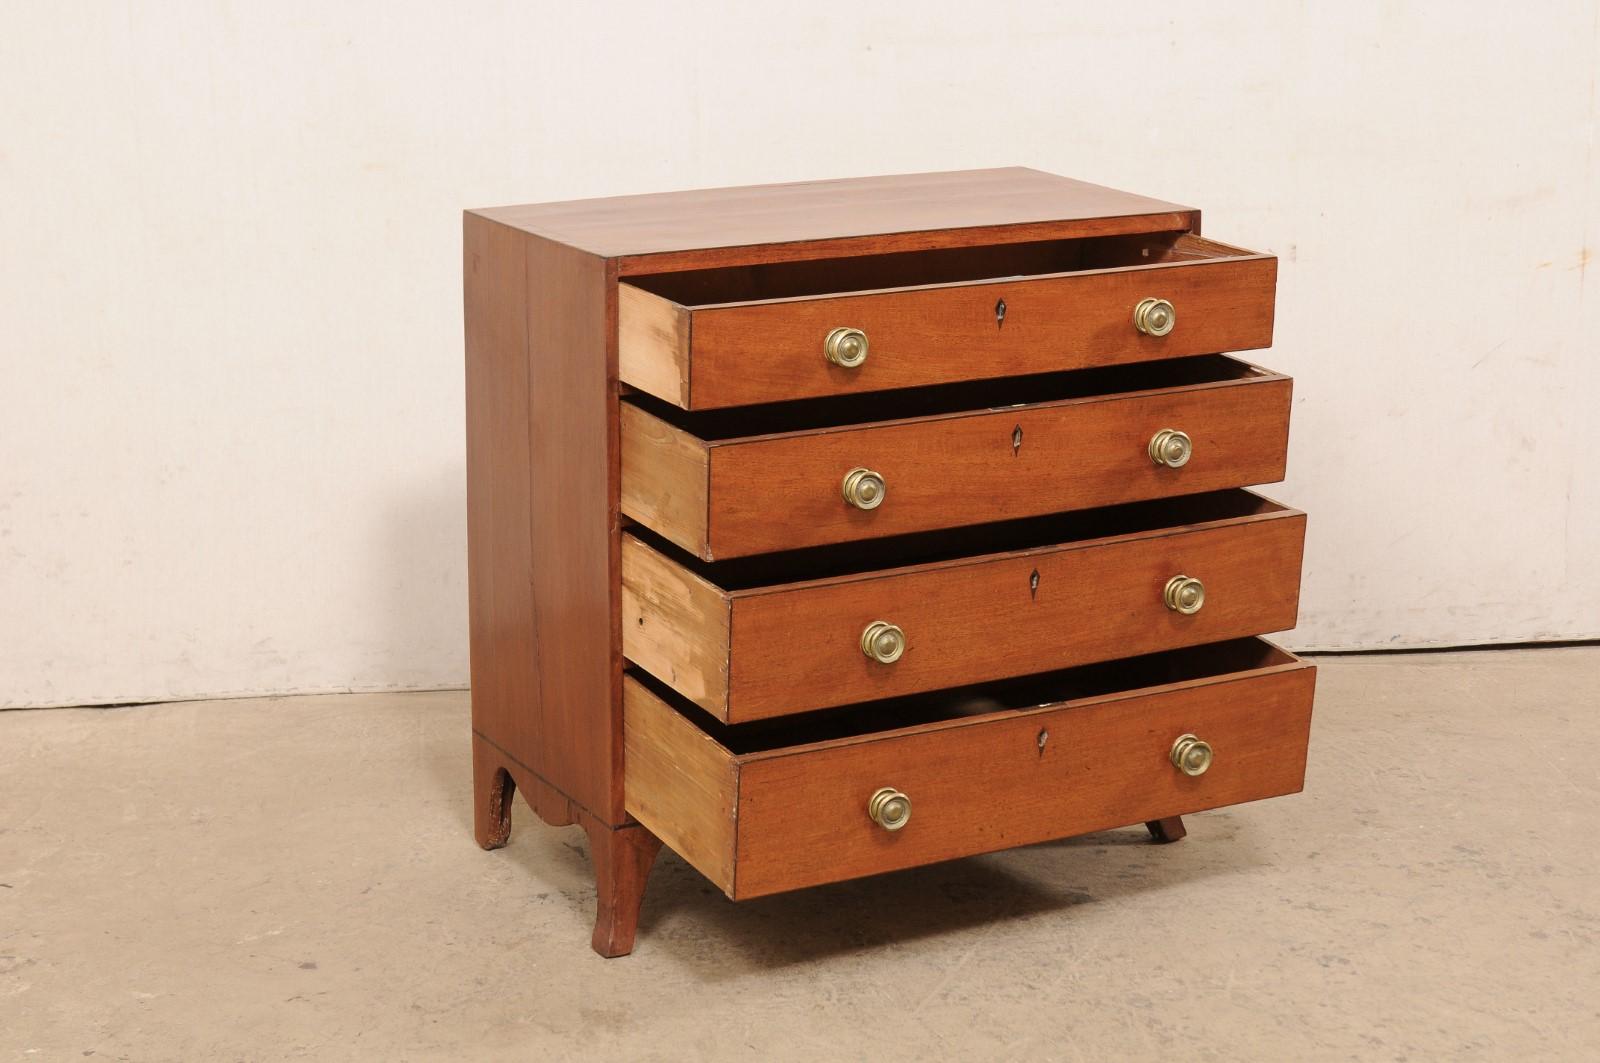 English Wooden Chest of 4 Drawers, Early to Mid 19th Century For Sale 1